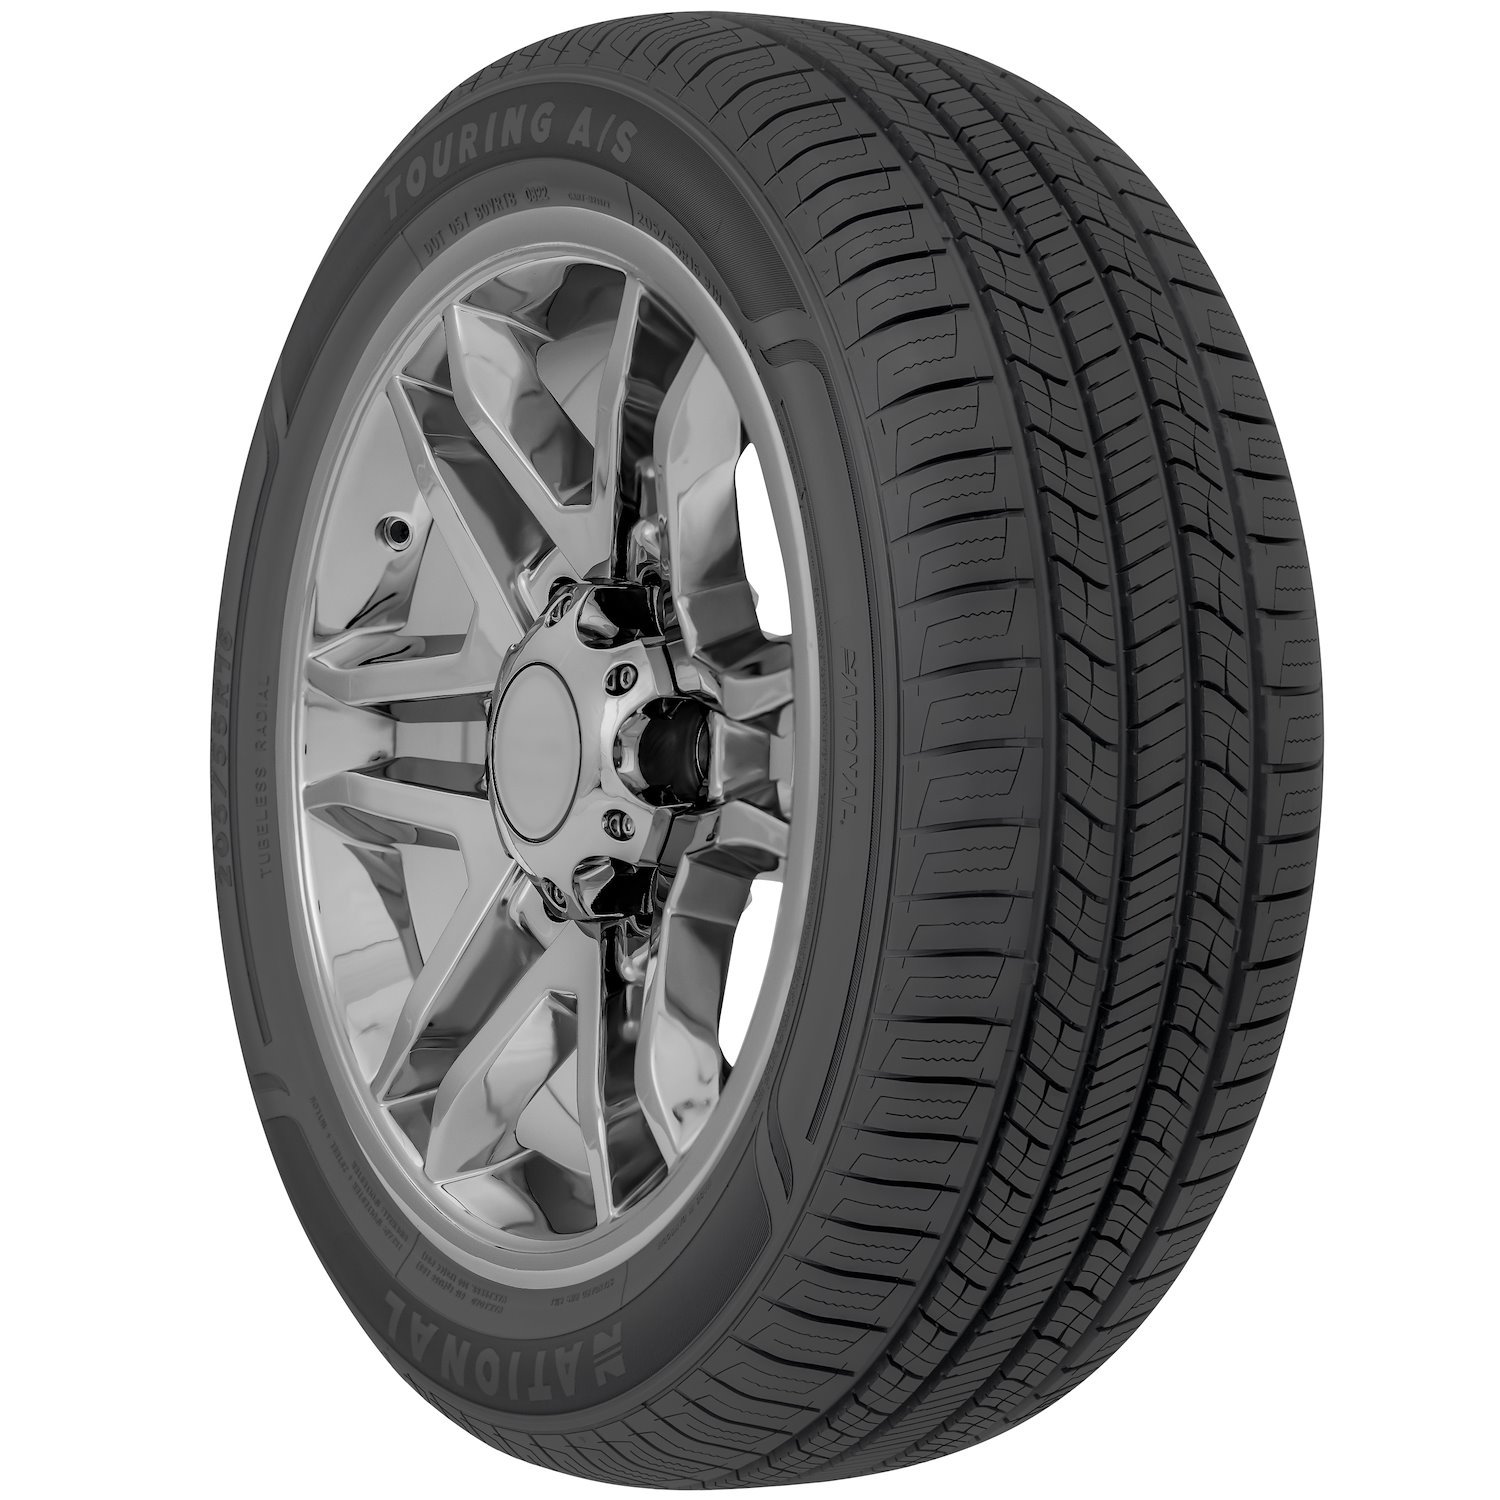 NLR33 Touring A/S Tire, 215/70R15